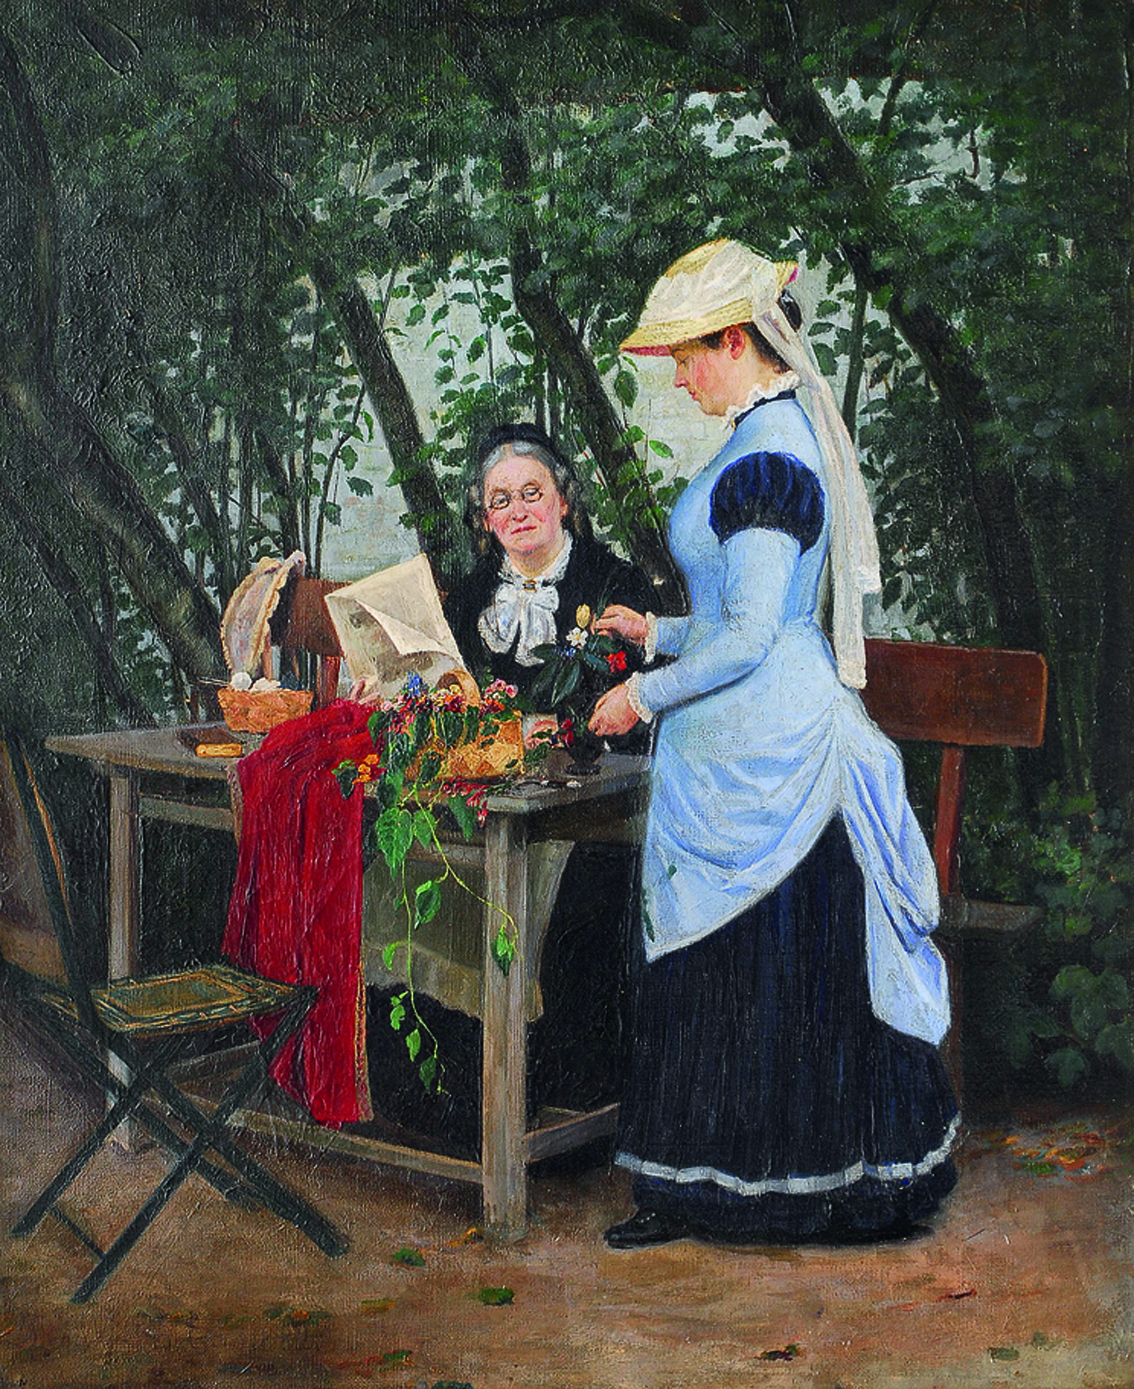 In the garden of the priest